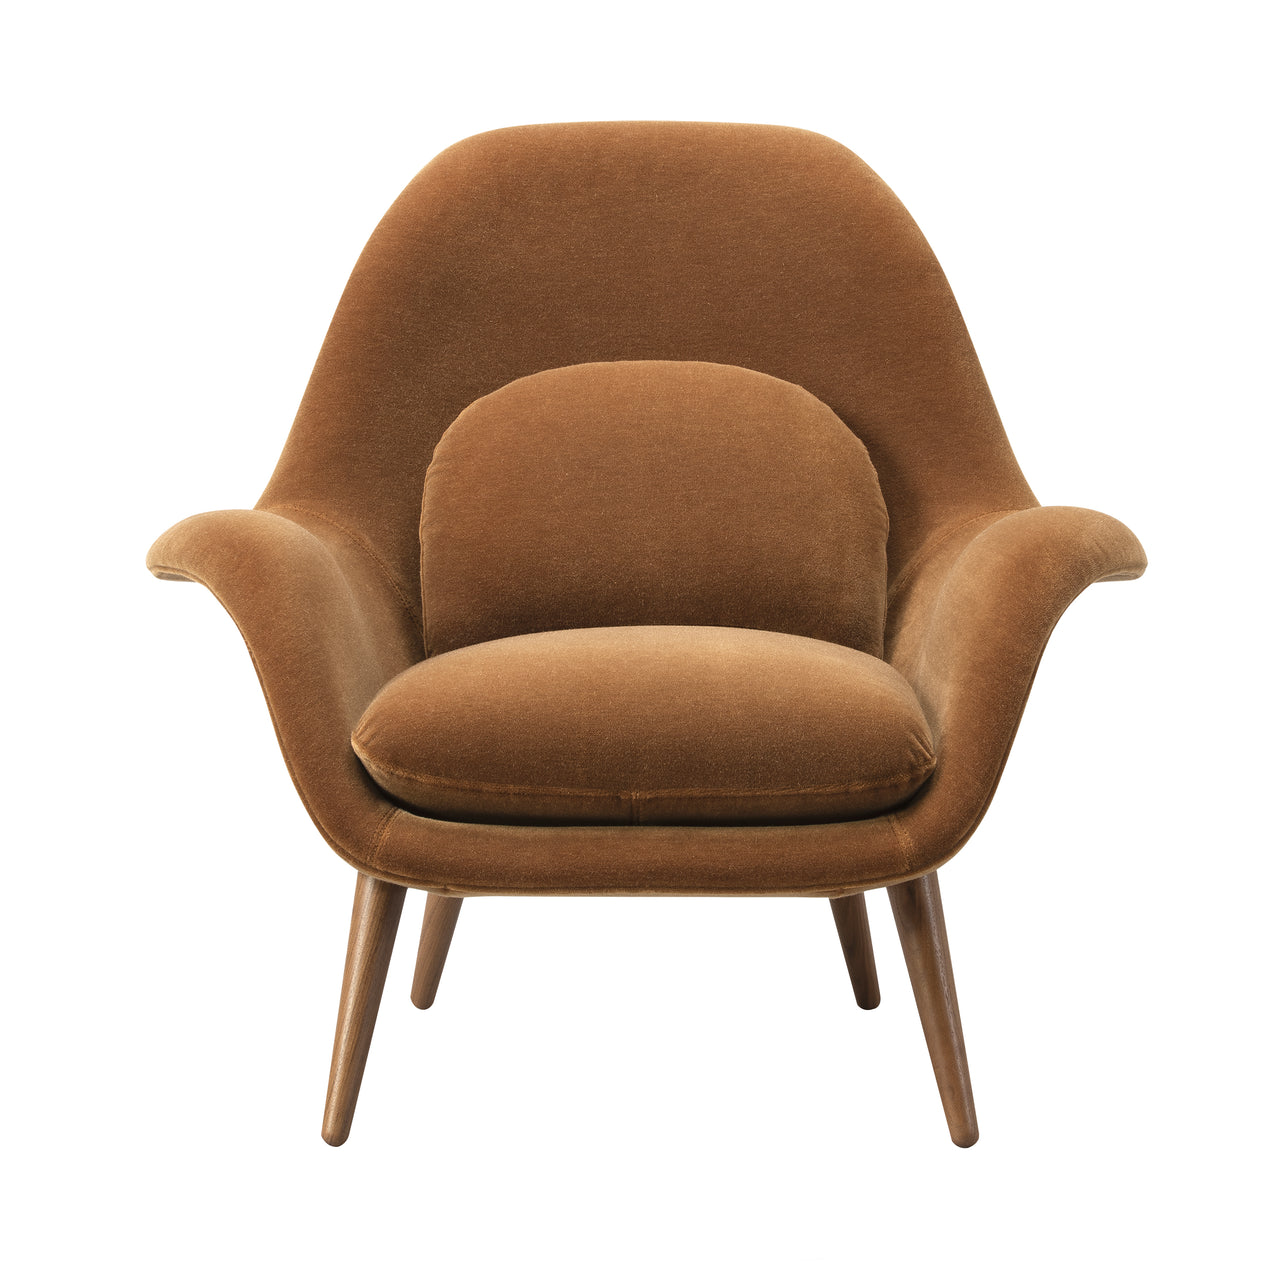 Swoon Lounge Chair: Smoked Stained Oak